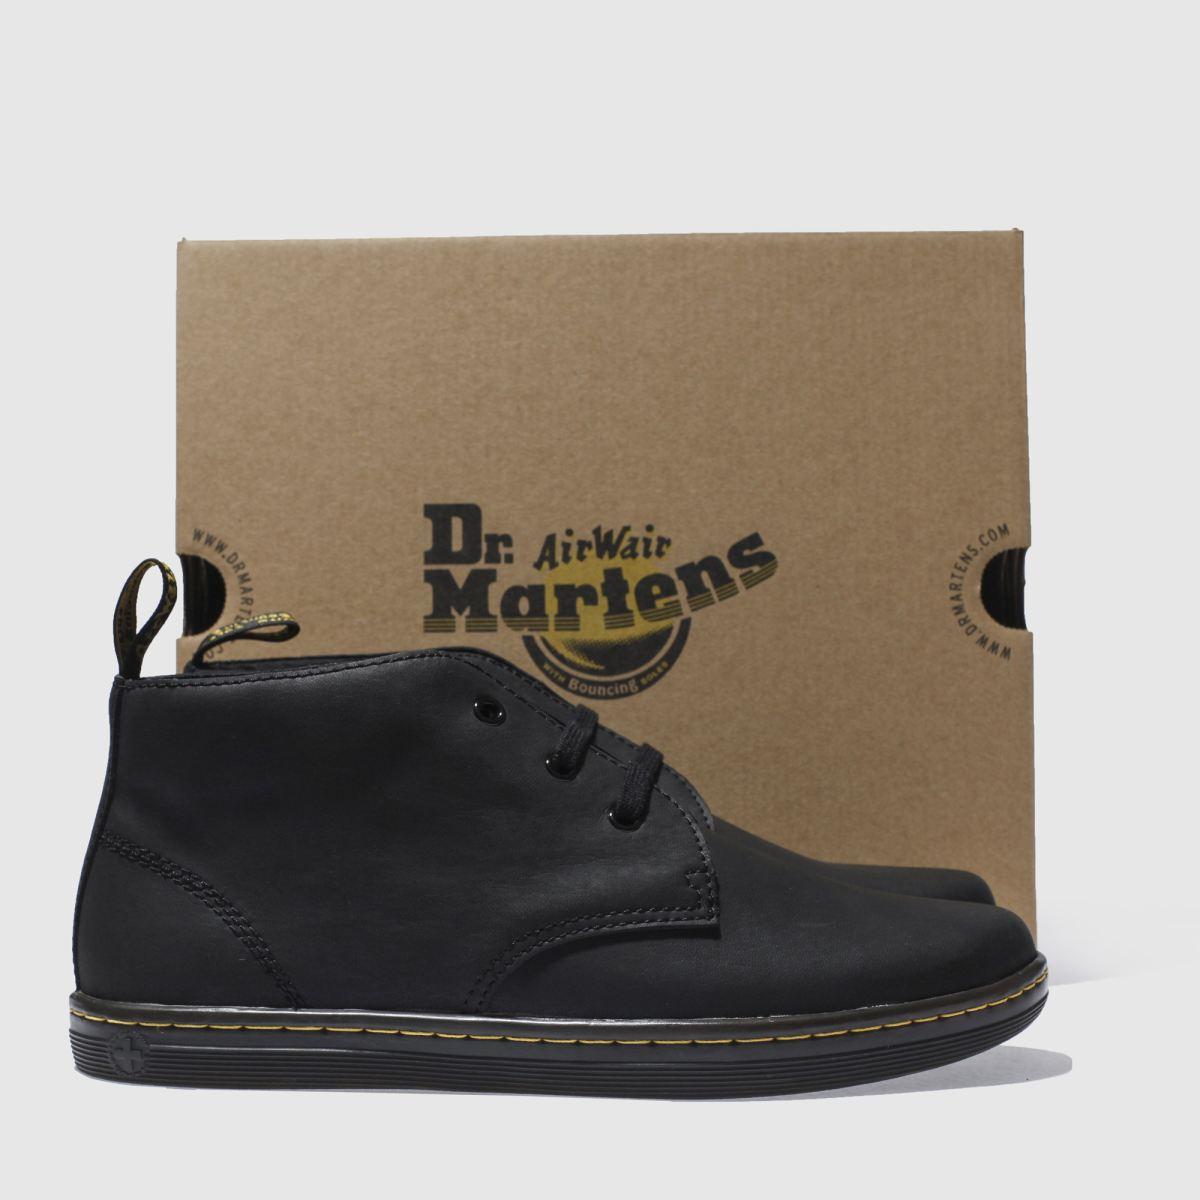 Dr. Martens Leather Will Desert Boots in Black for Men - Lyst